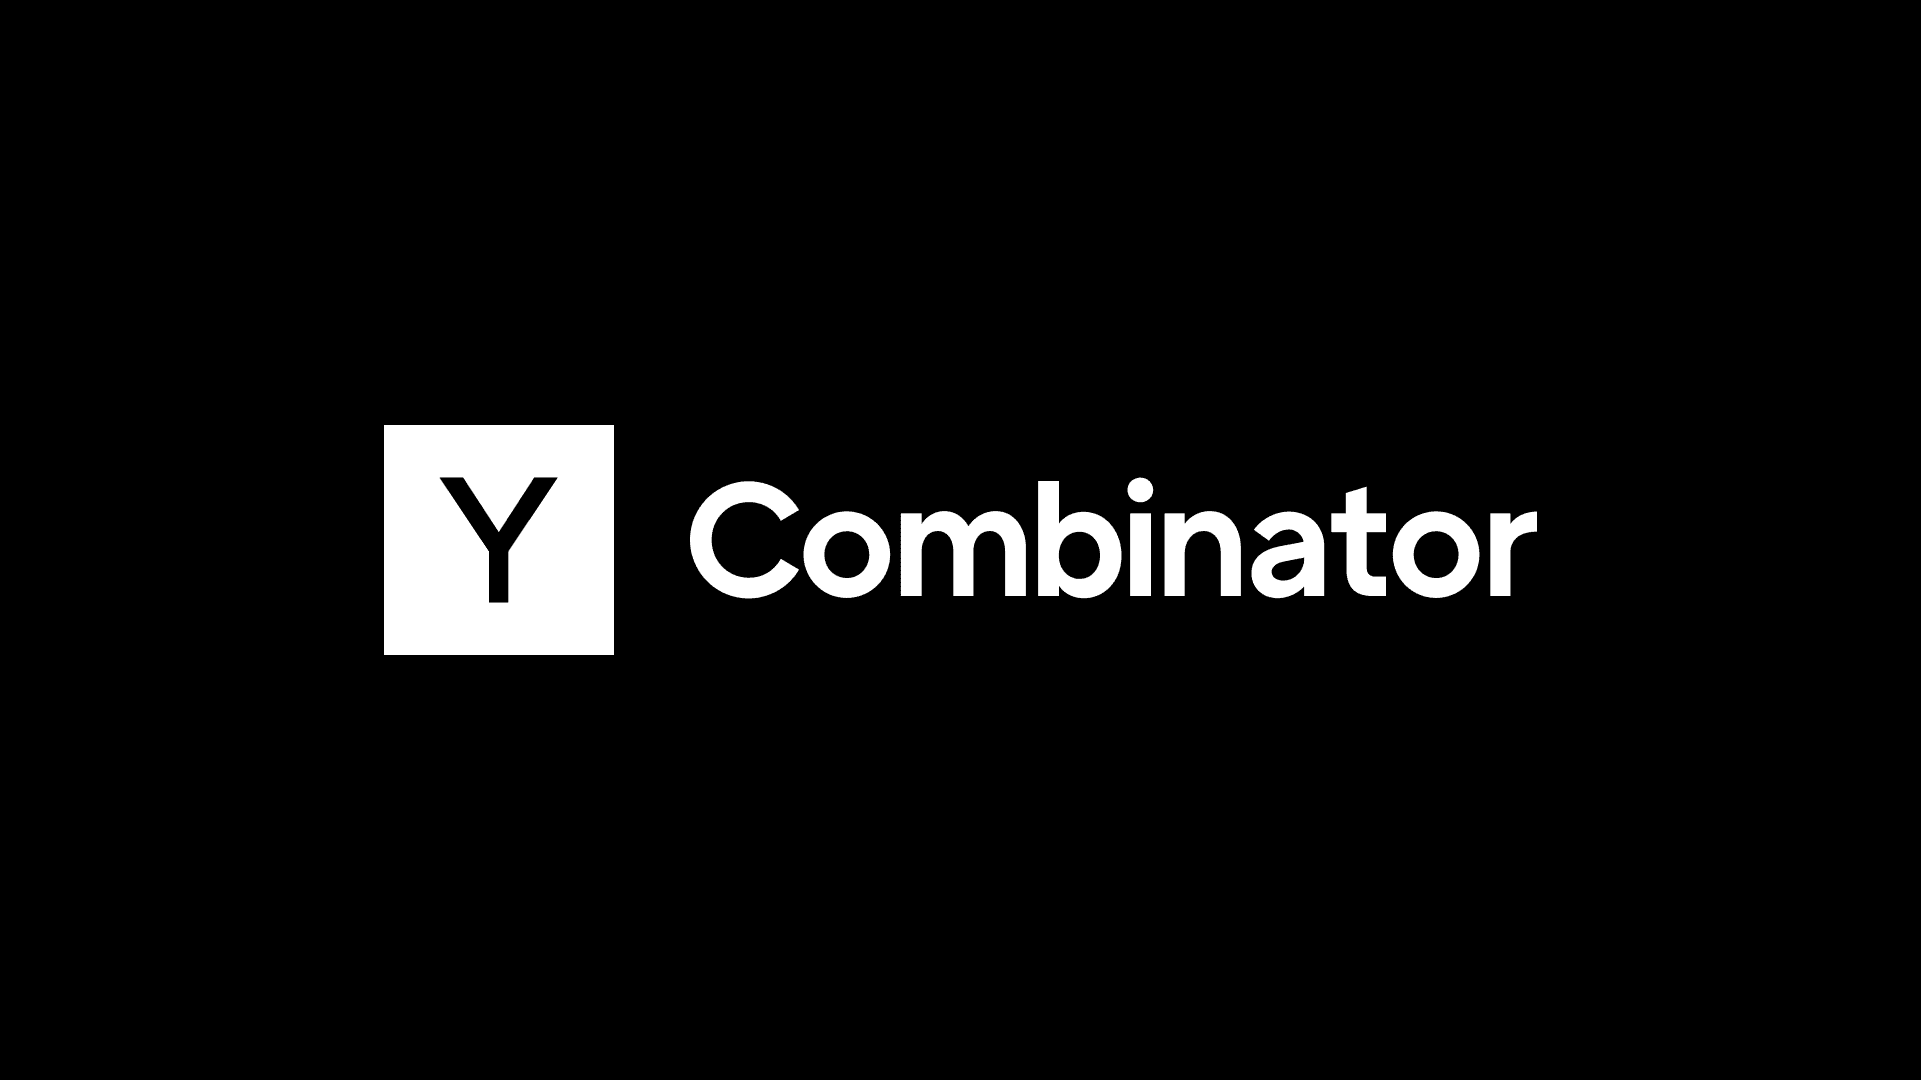 Y Combinator’s Winter 2023 Cybersecurity, Privacy, and Trust Startups – Source: securityboulevard.com